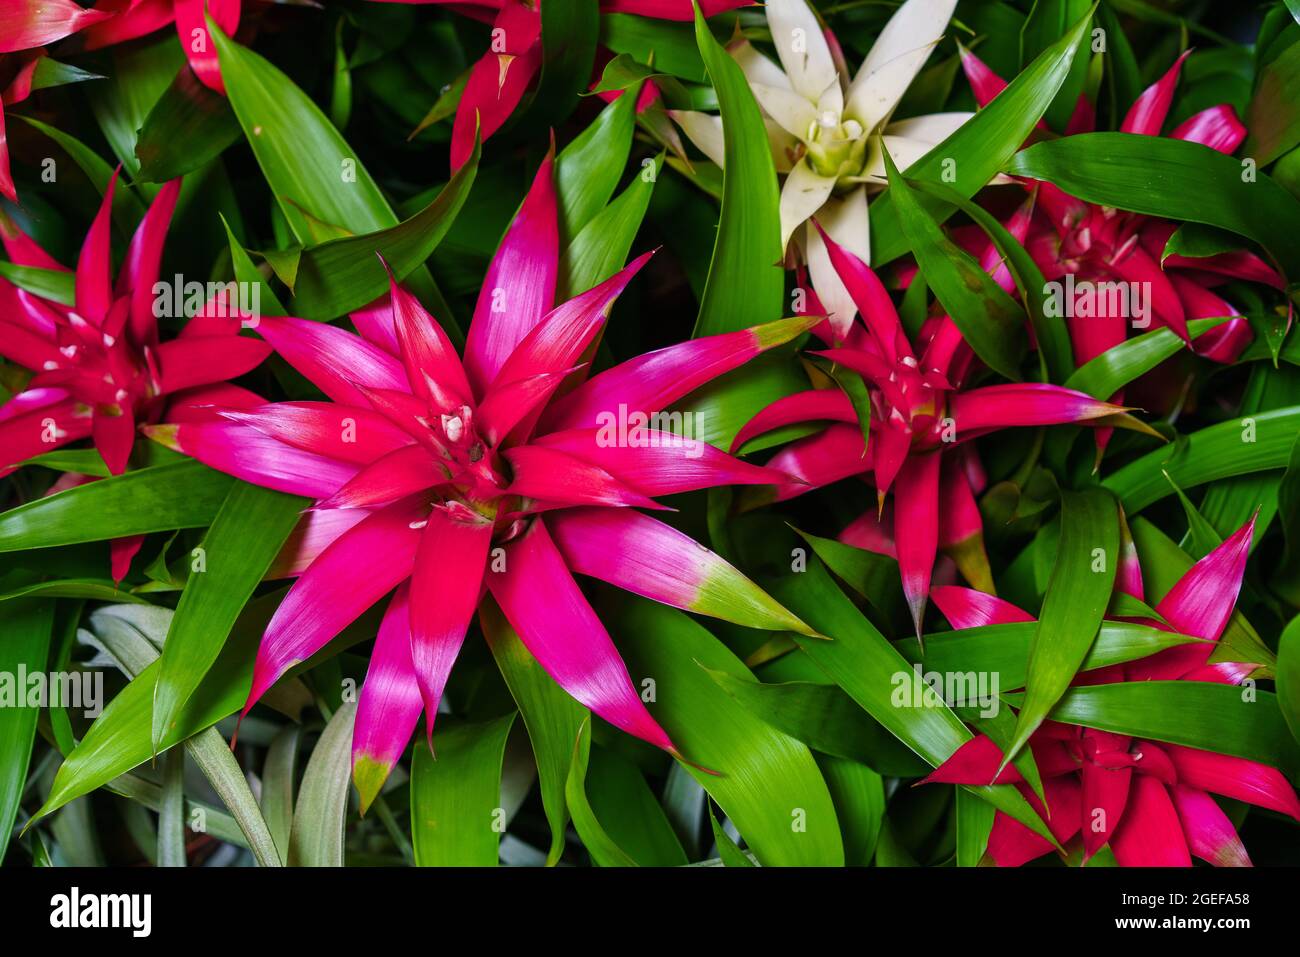 Indoor red bromeliad flower close-up, this is flowering plant from bromeliad family, a symbol of good luck in the new year. View from the top as a natural background. Stock Photo